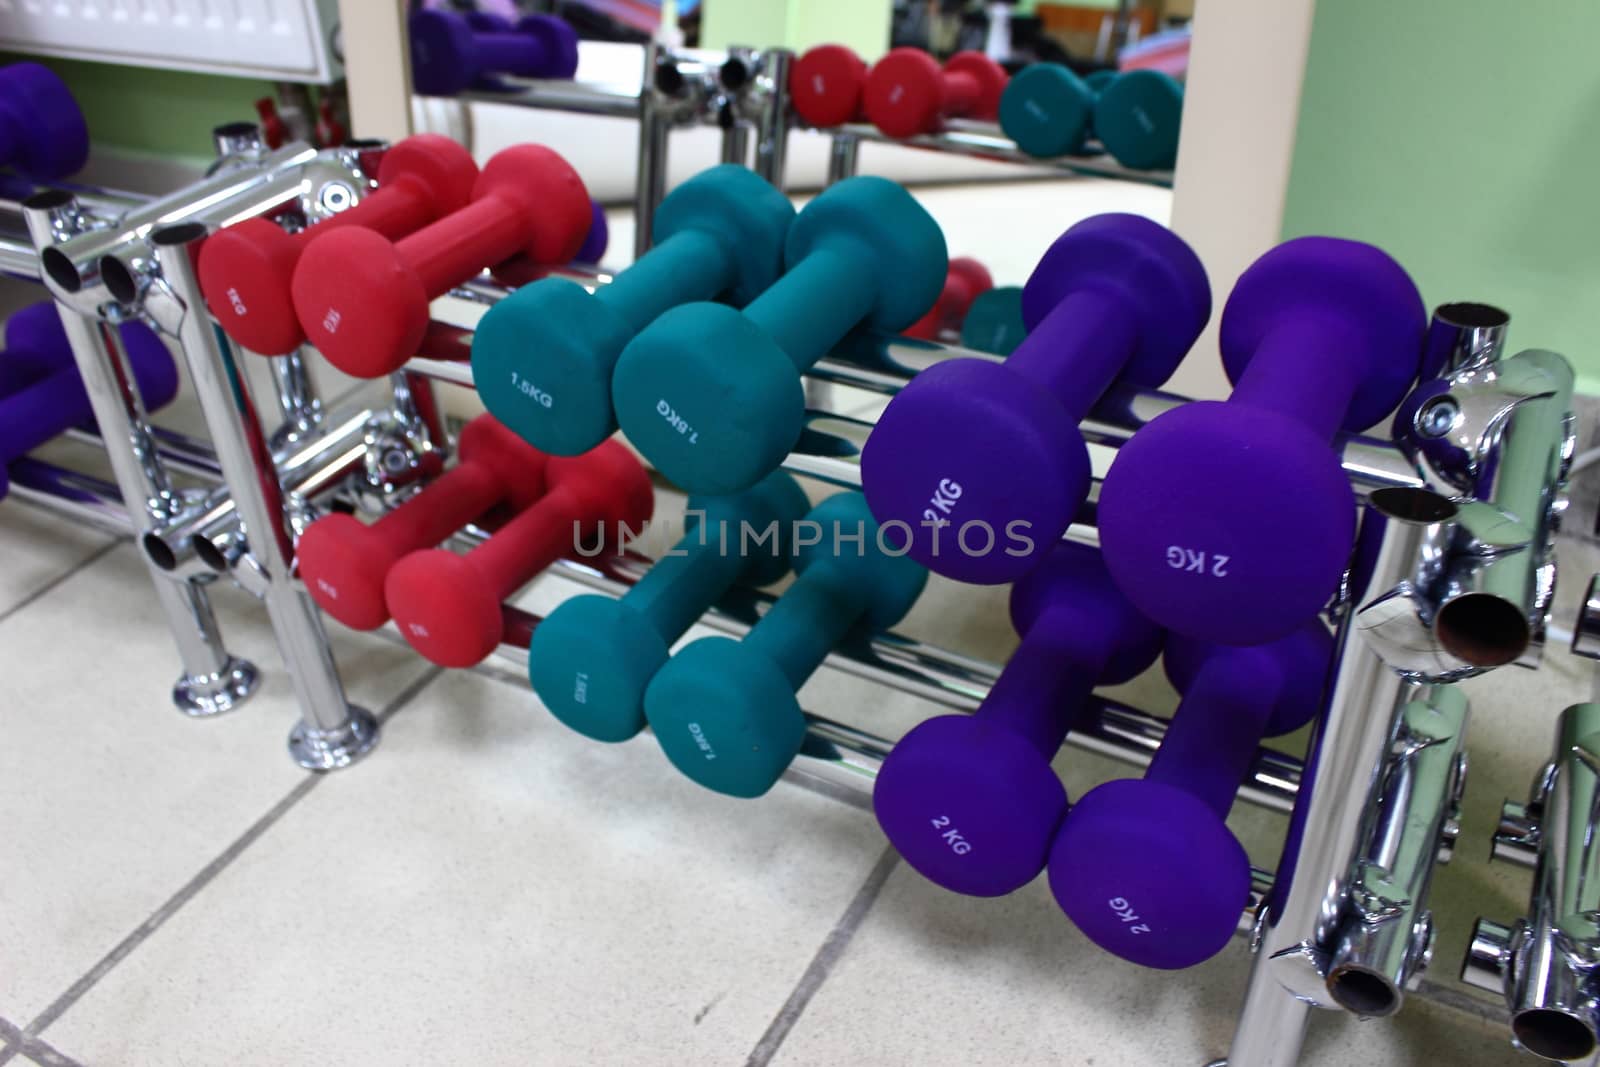 Different weights and multicolored dumbbells lie on a metal rack in a gym